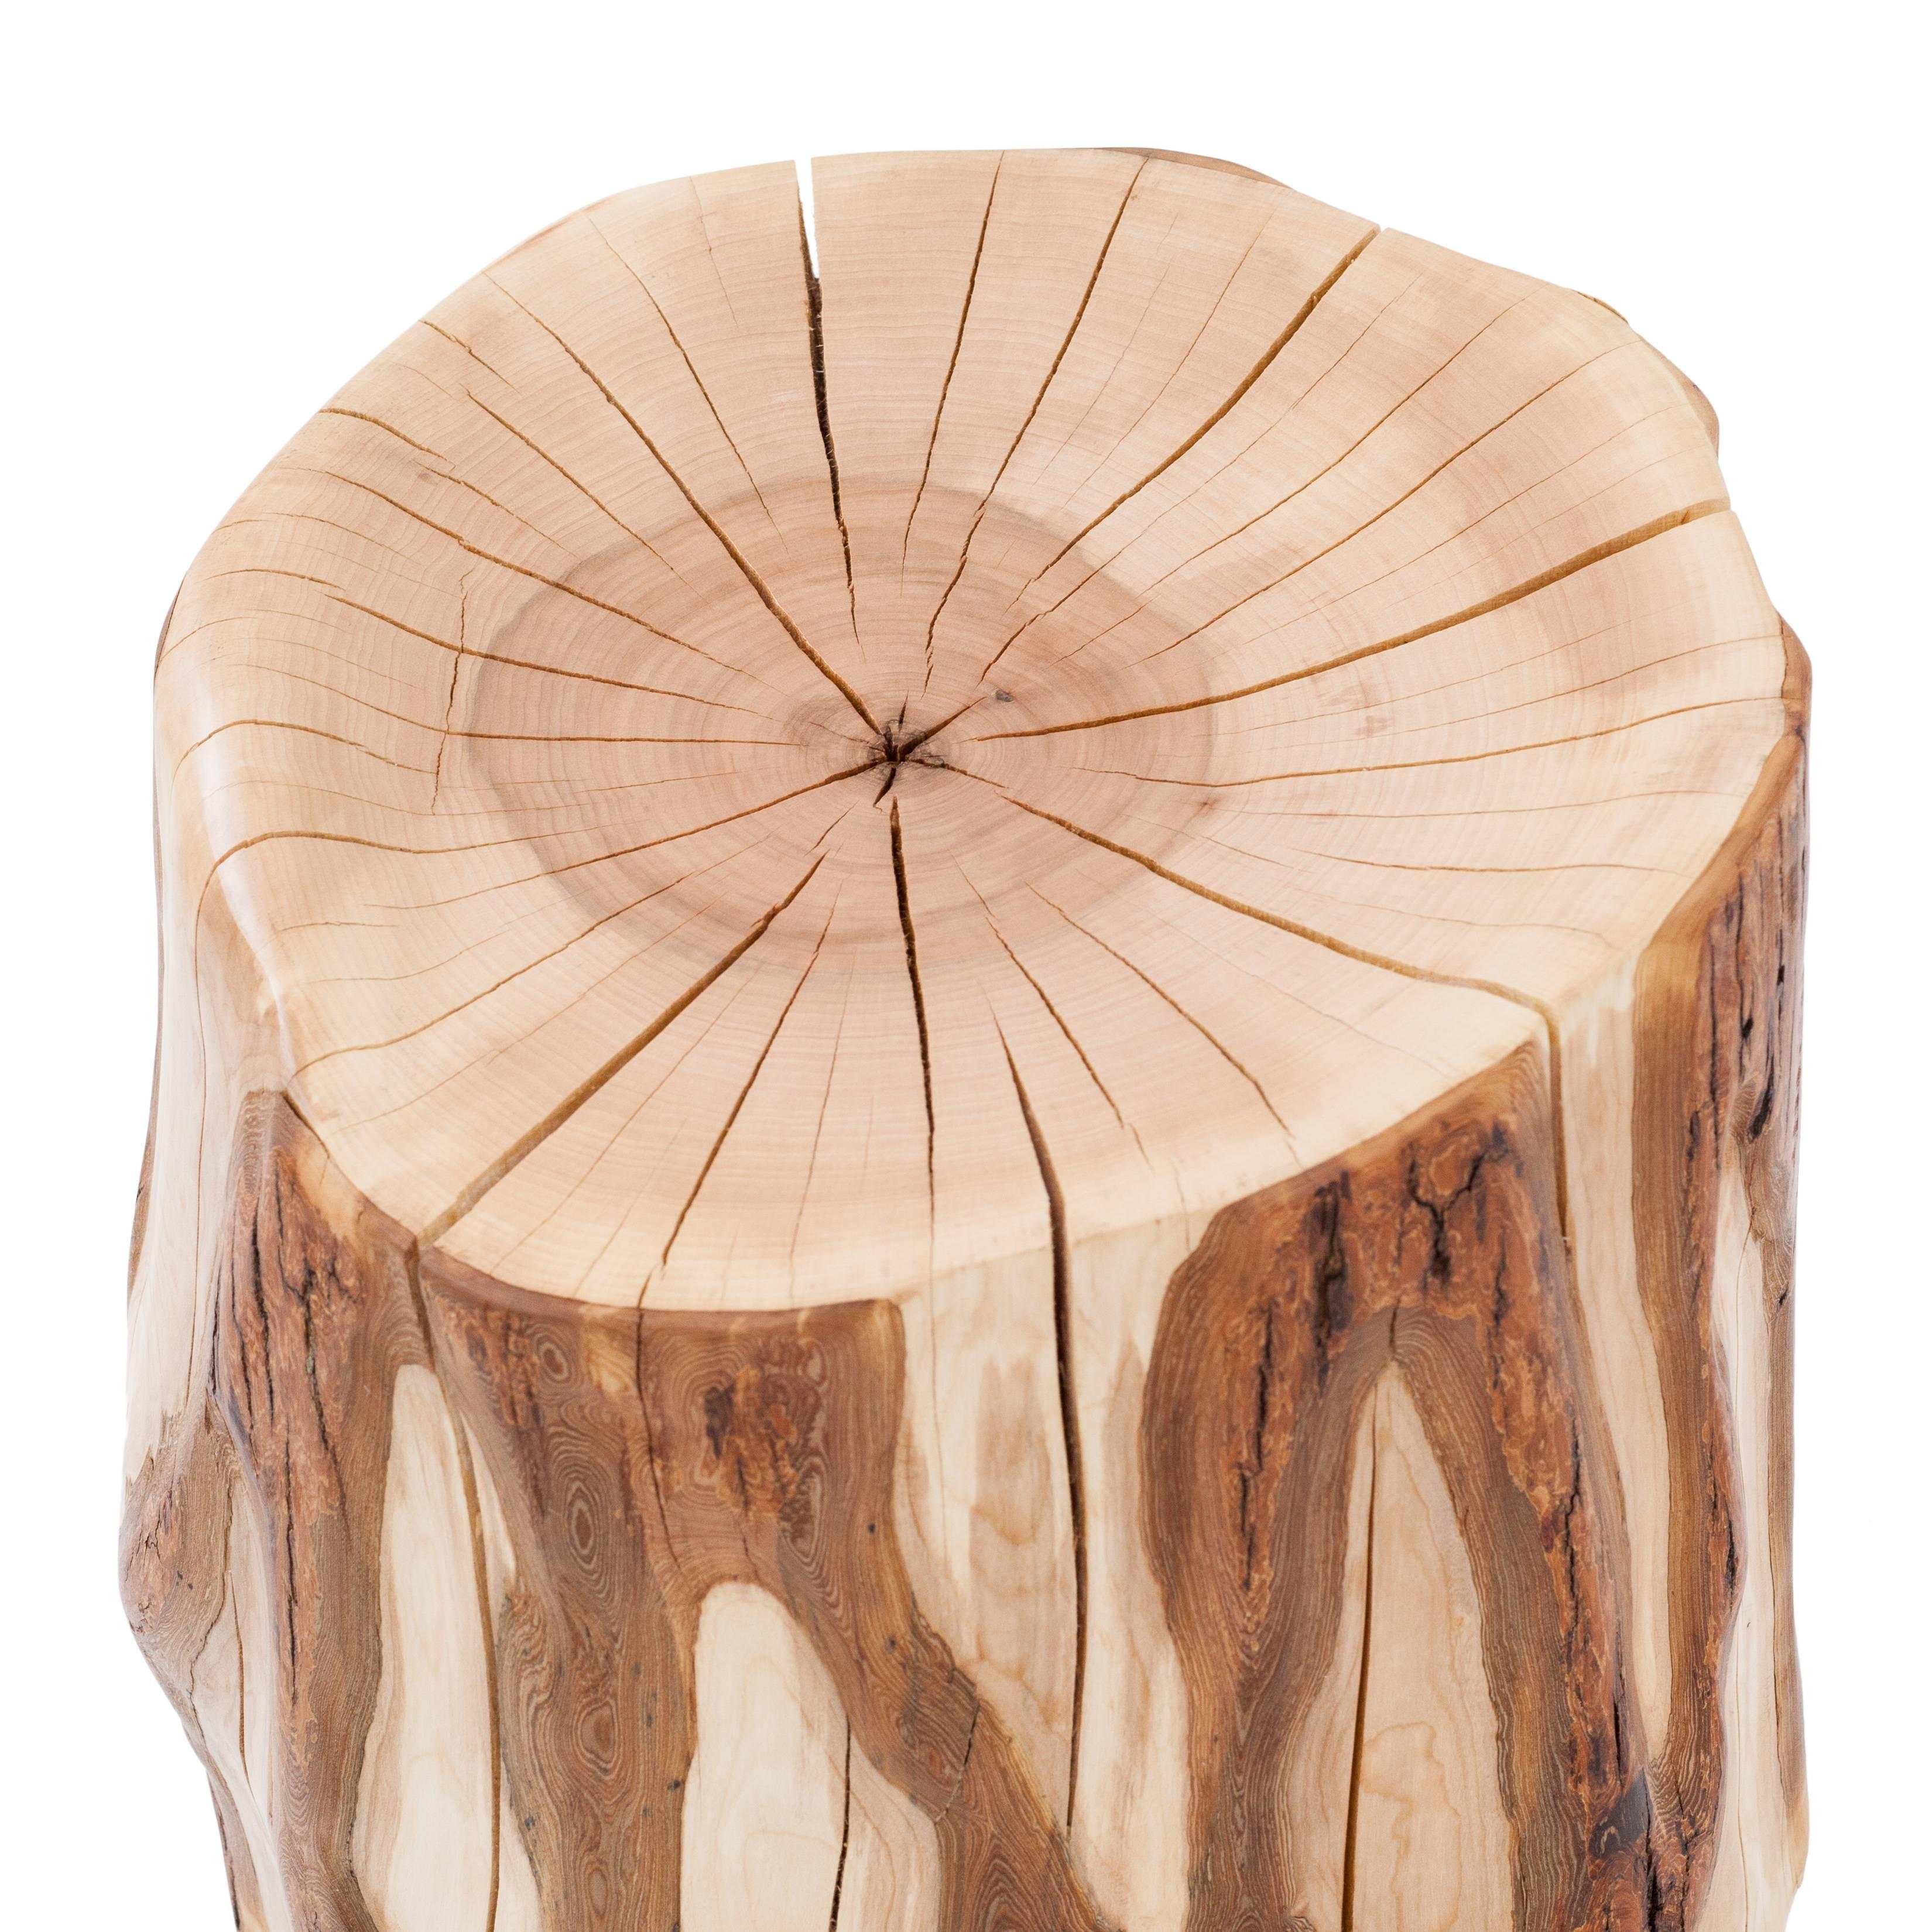 A sugar maple that fell during Hurricane Sandy was rescued and repurposed. Sections of the tree were cut with a chainsaw and allowed to dry out. Each piece is then uniquely shaped with or without a design and has a scooped out seat for comfort. Each